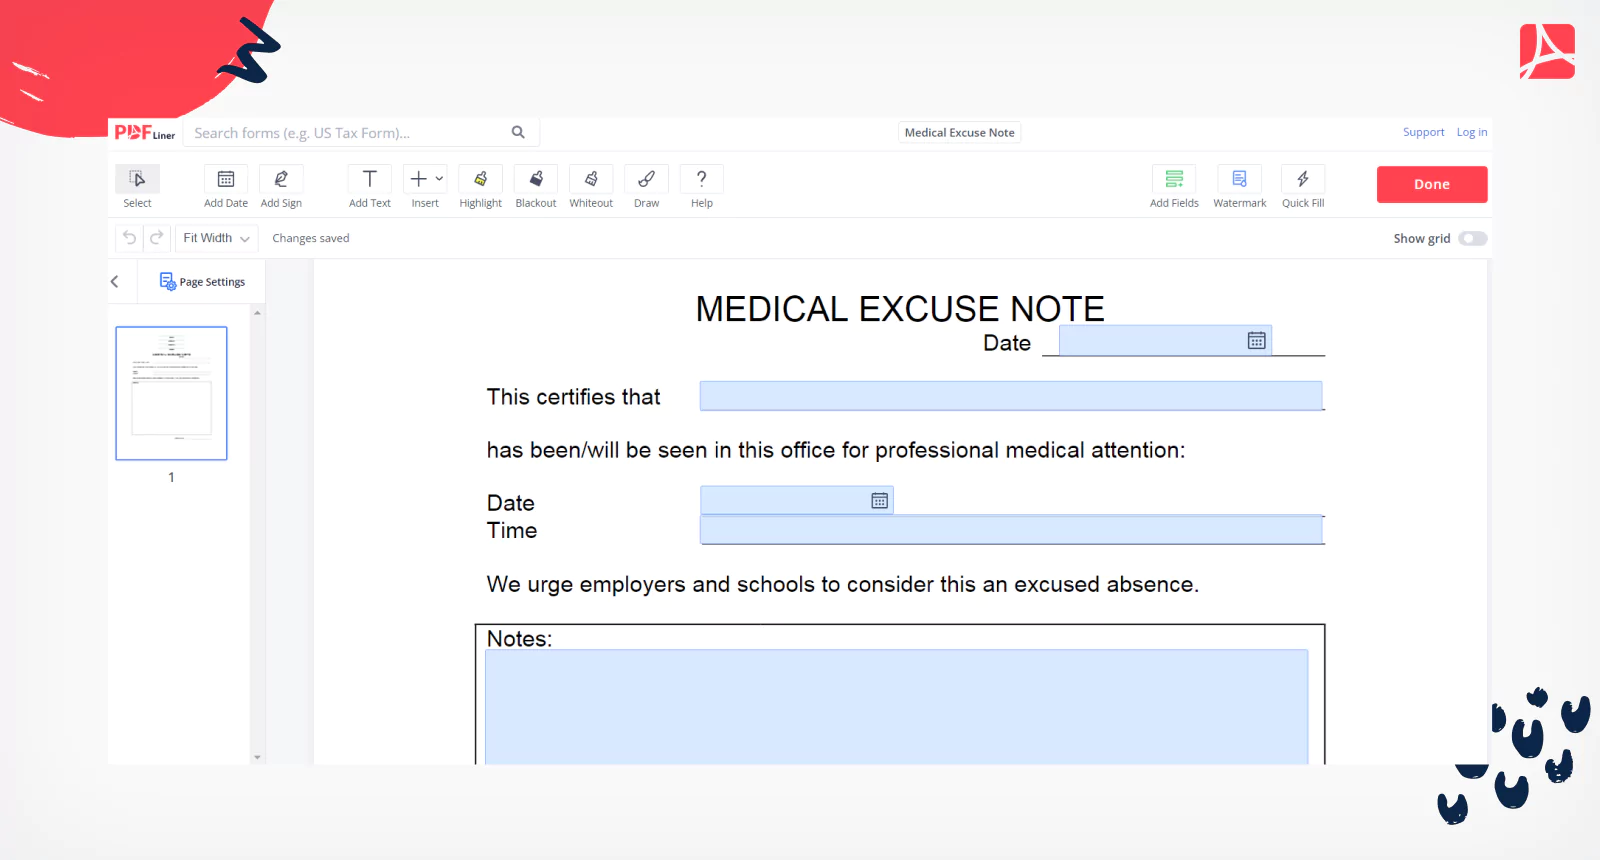 Medical Excuse Note on PDFLiner